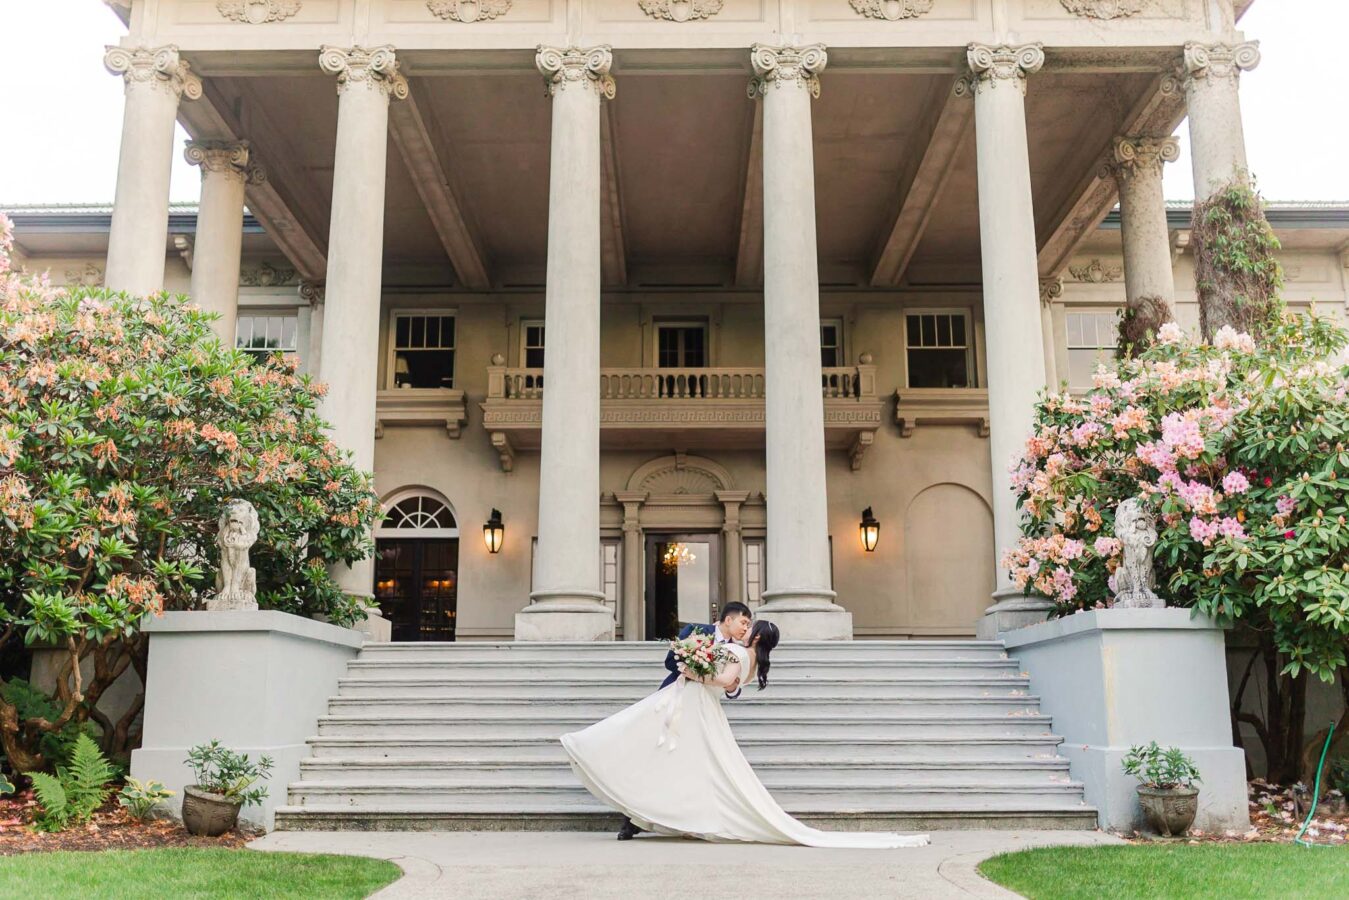 Bride and Groom kissing under the grand staircase of Hycroft Manor, Vancouver wedding photography by Vivian Ng Photography